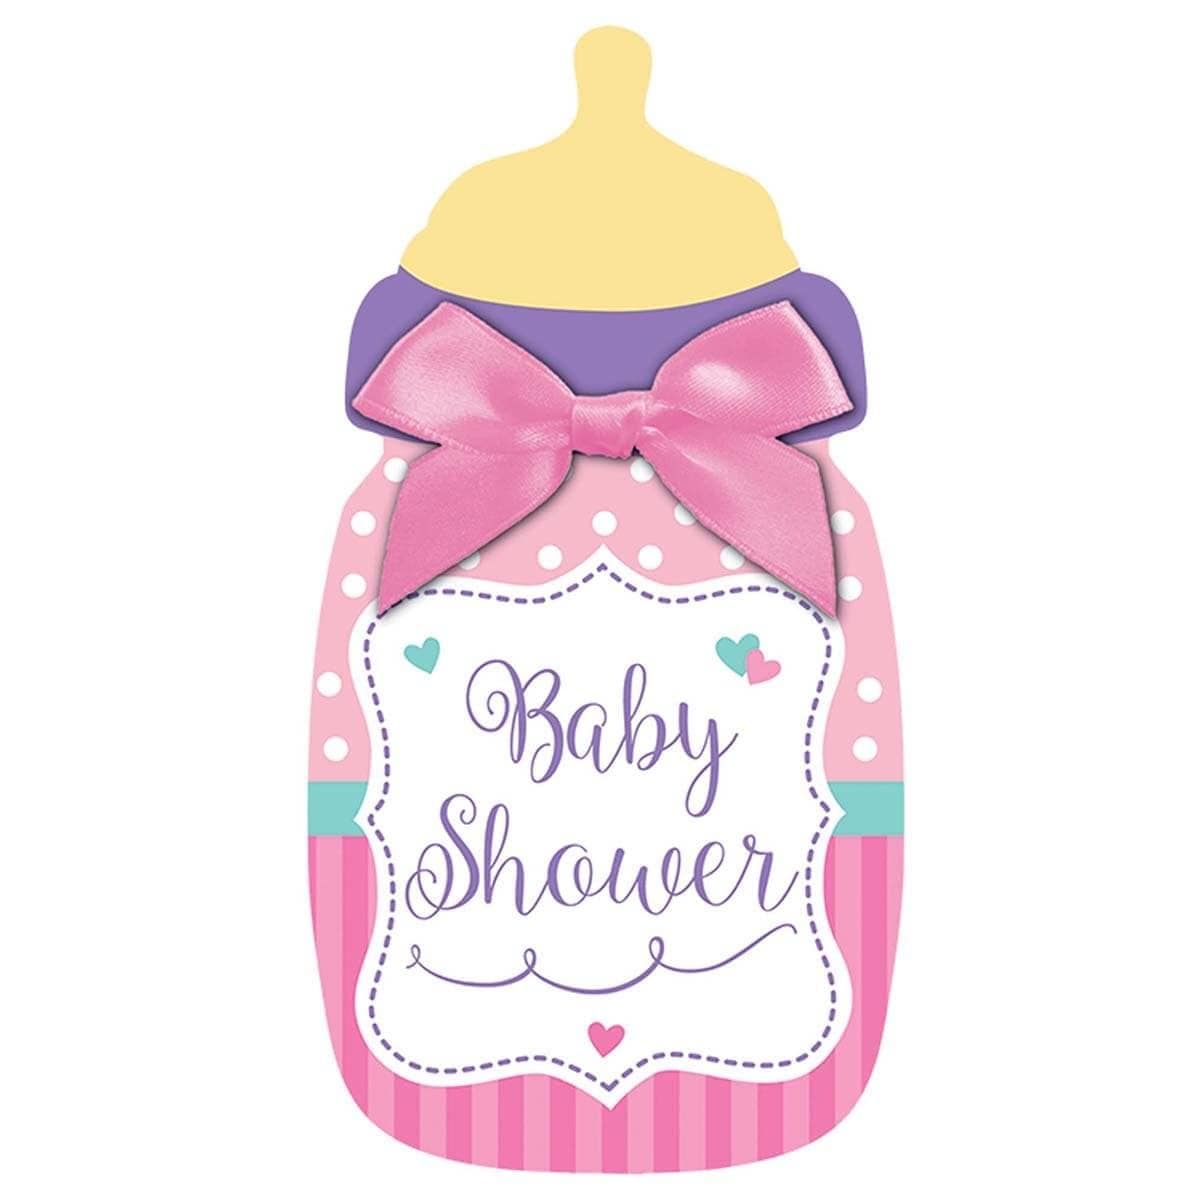 Buy Baby Shower Large pink baby bottle invitations, 8 per package sold at Party Expert